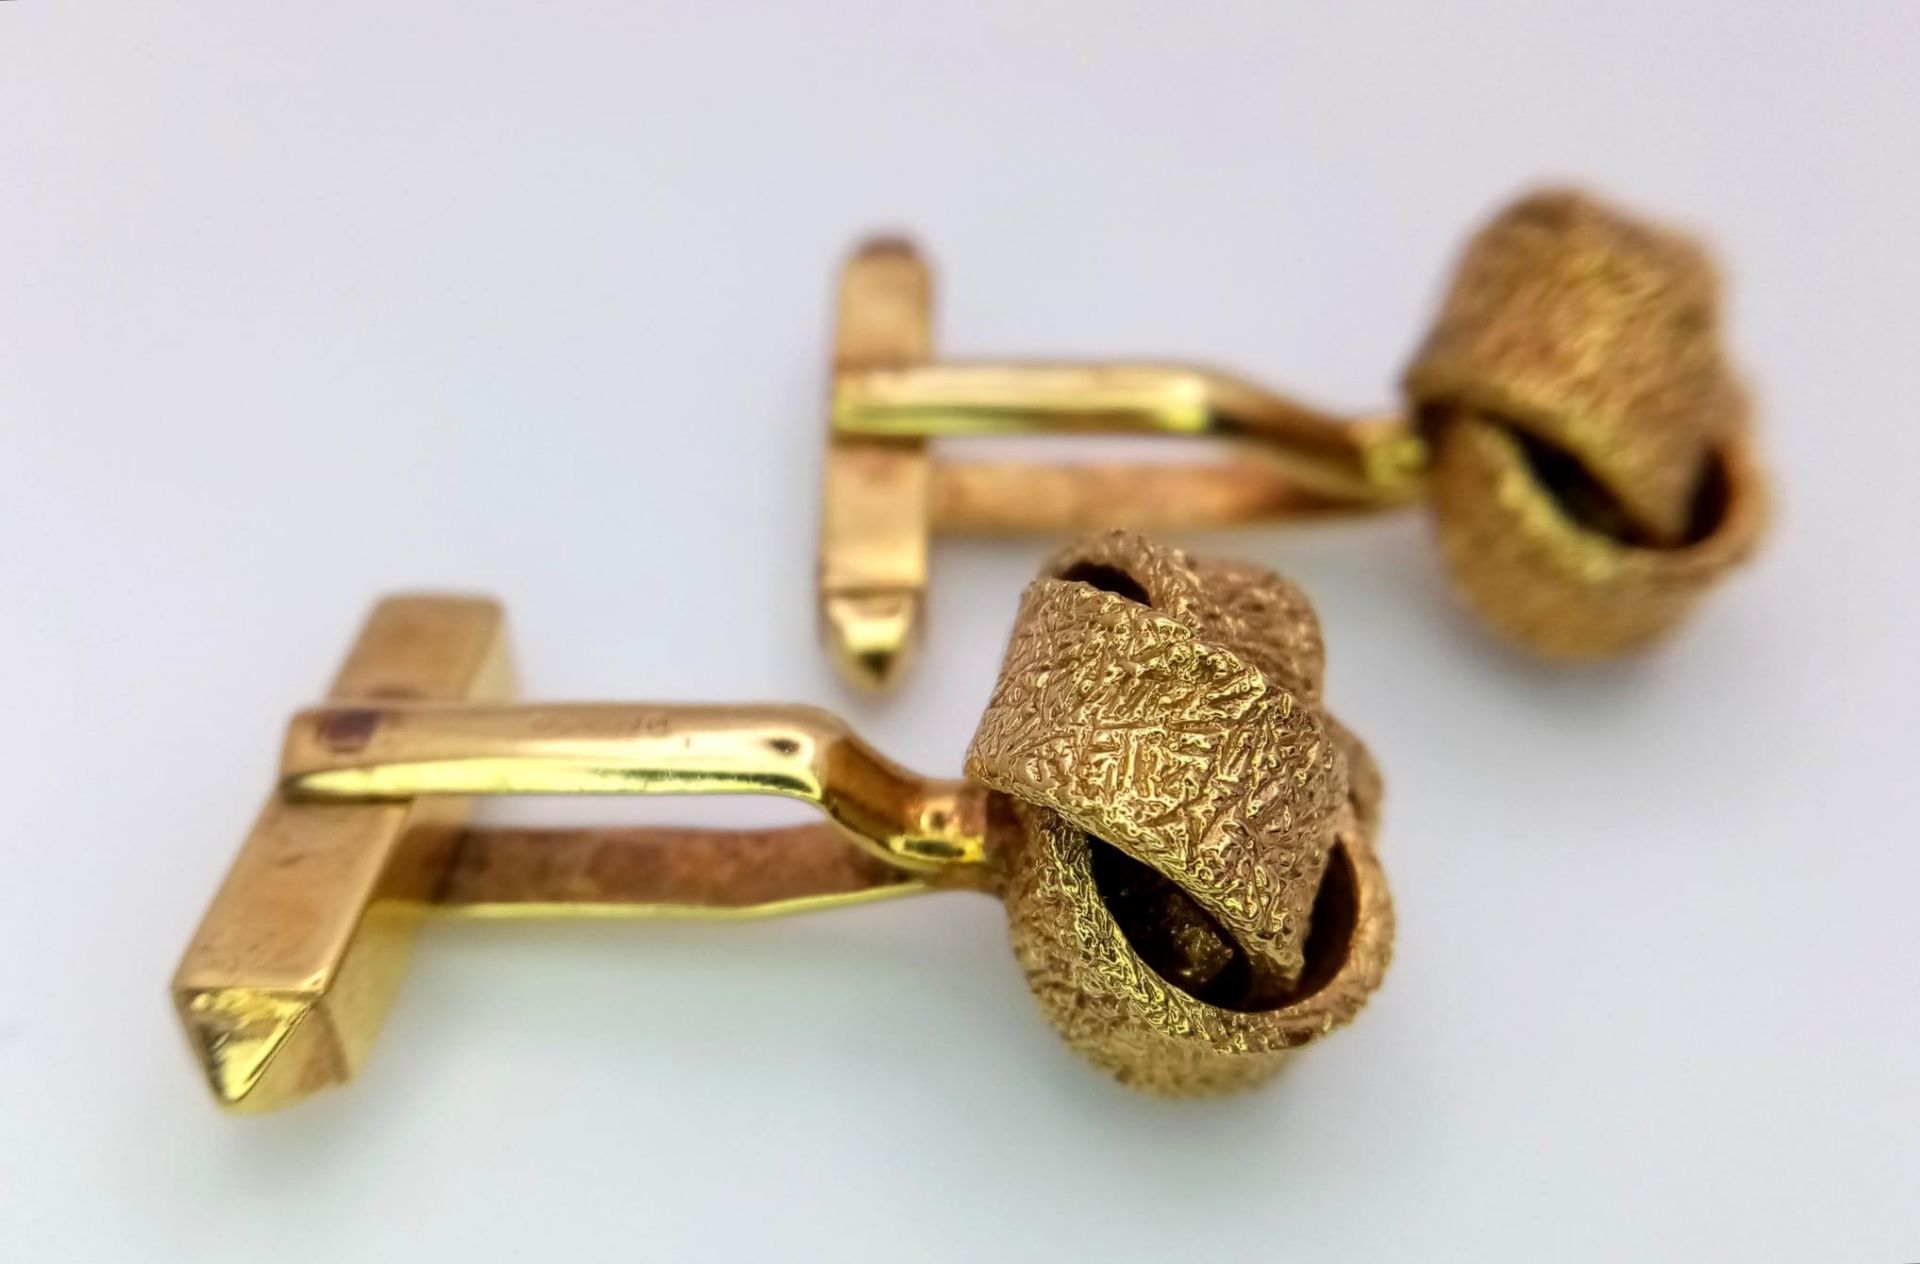 A Pair of Vintage 9K Yellow Gold Knot Cufflinks. 16.6g weight. - Image 3 of 5